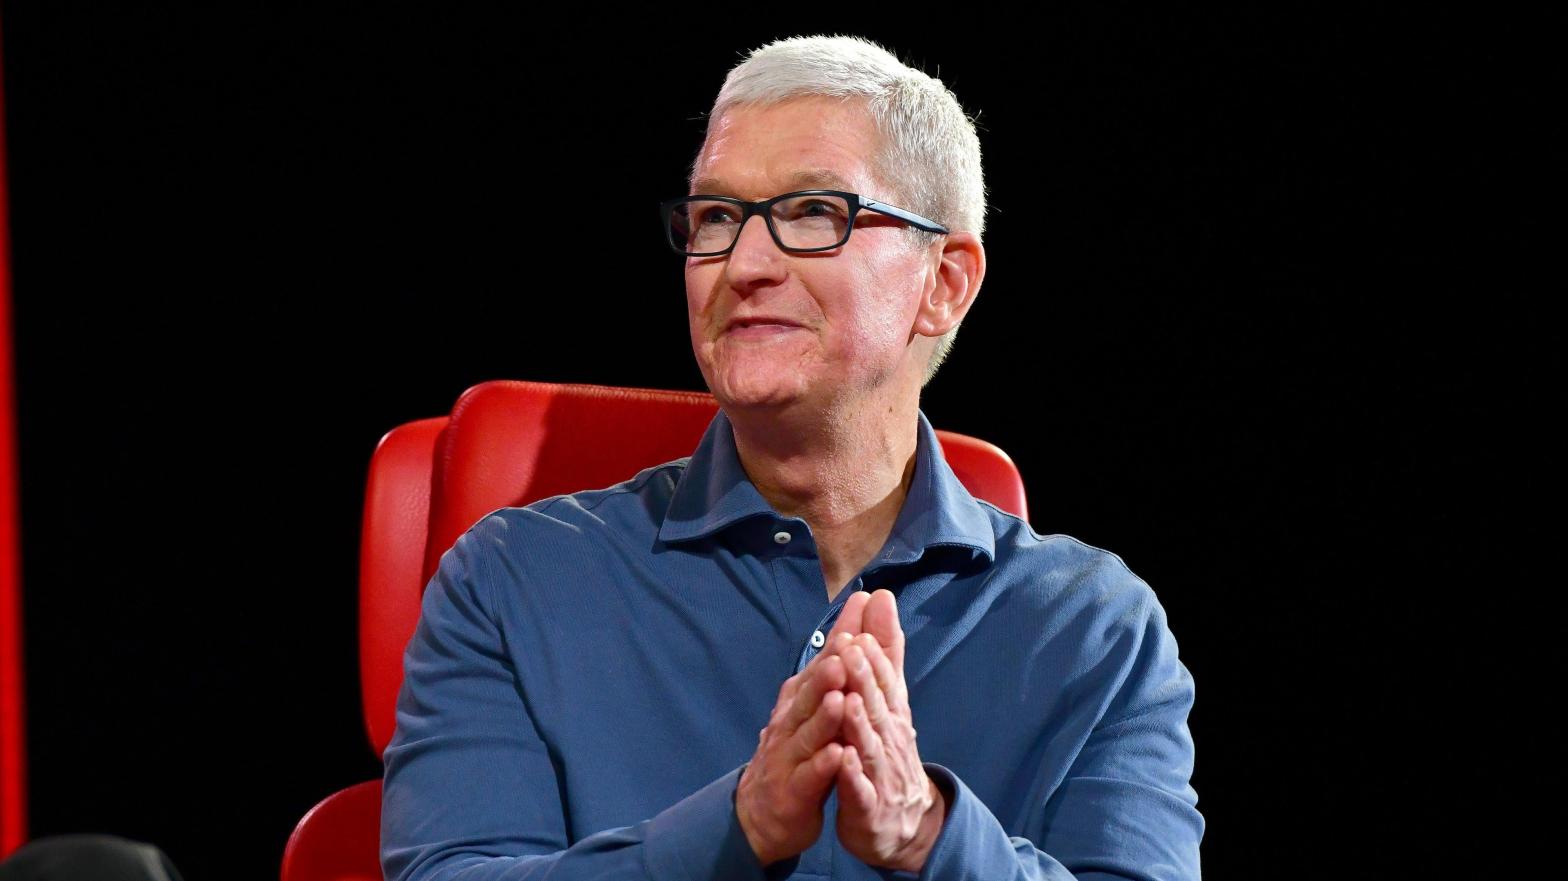 Apple CEO Tim Cook's tenure has seen the company delve deeper and deeper into fintech with Apple Pay and now its Apple Savings account. (Photo: Jerod Harris, Getty Images)